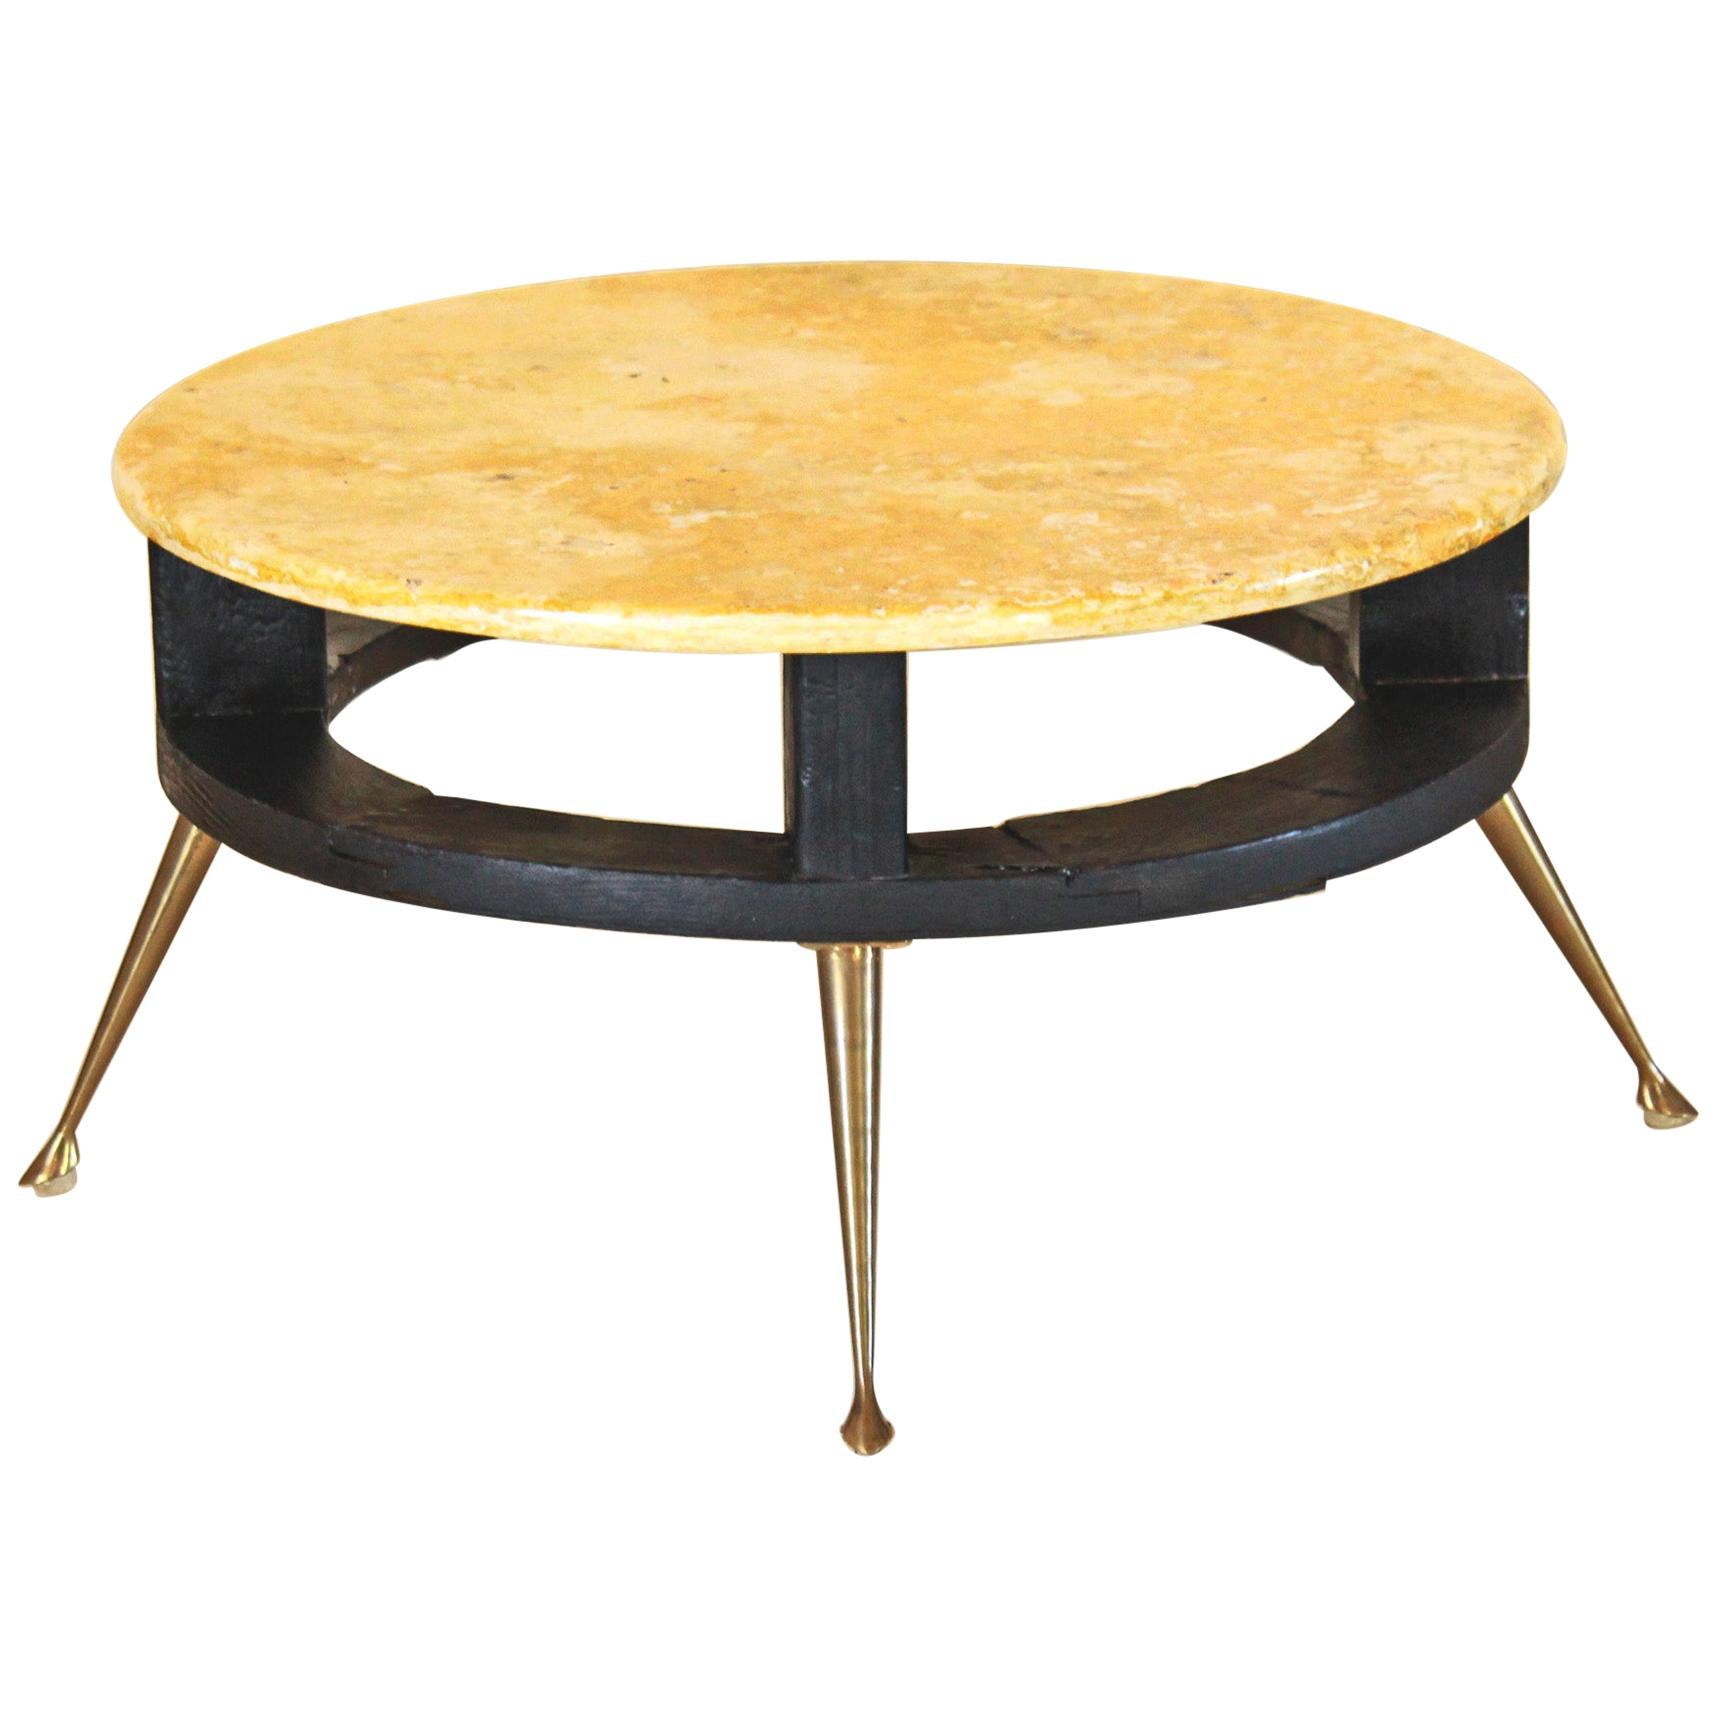 1950s Vintage Coffee Table with Yellow Marble Top and Brass Feet